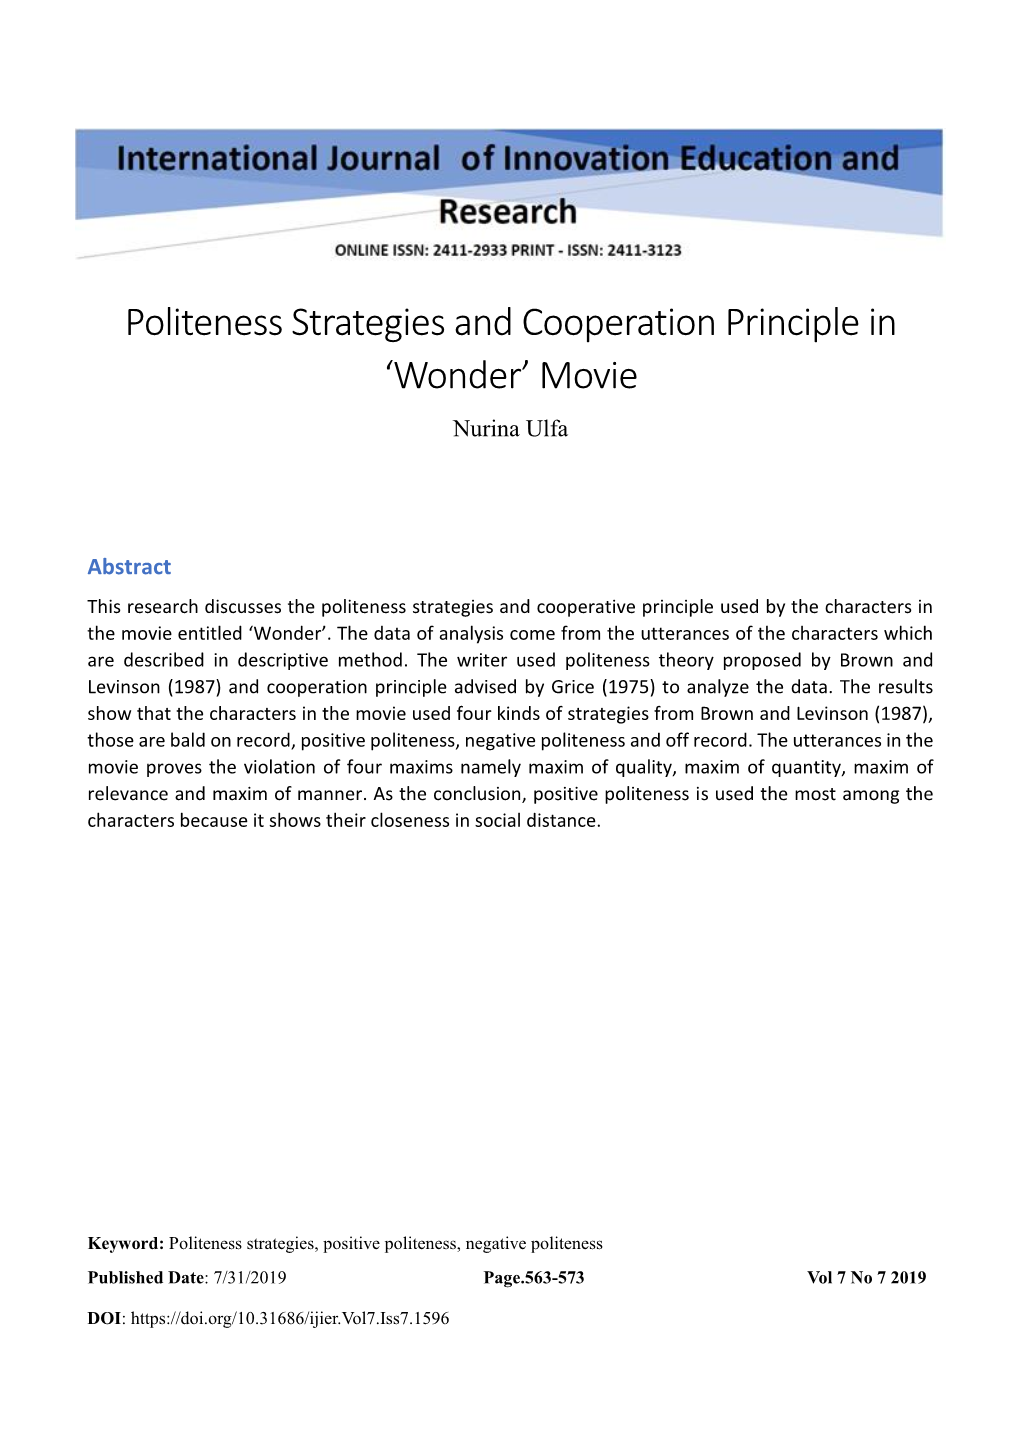 Politeness Strategies and Cooperation Principle in 'Wonder'